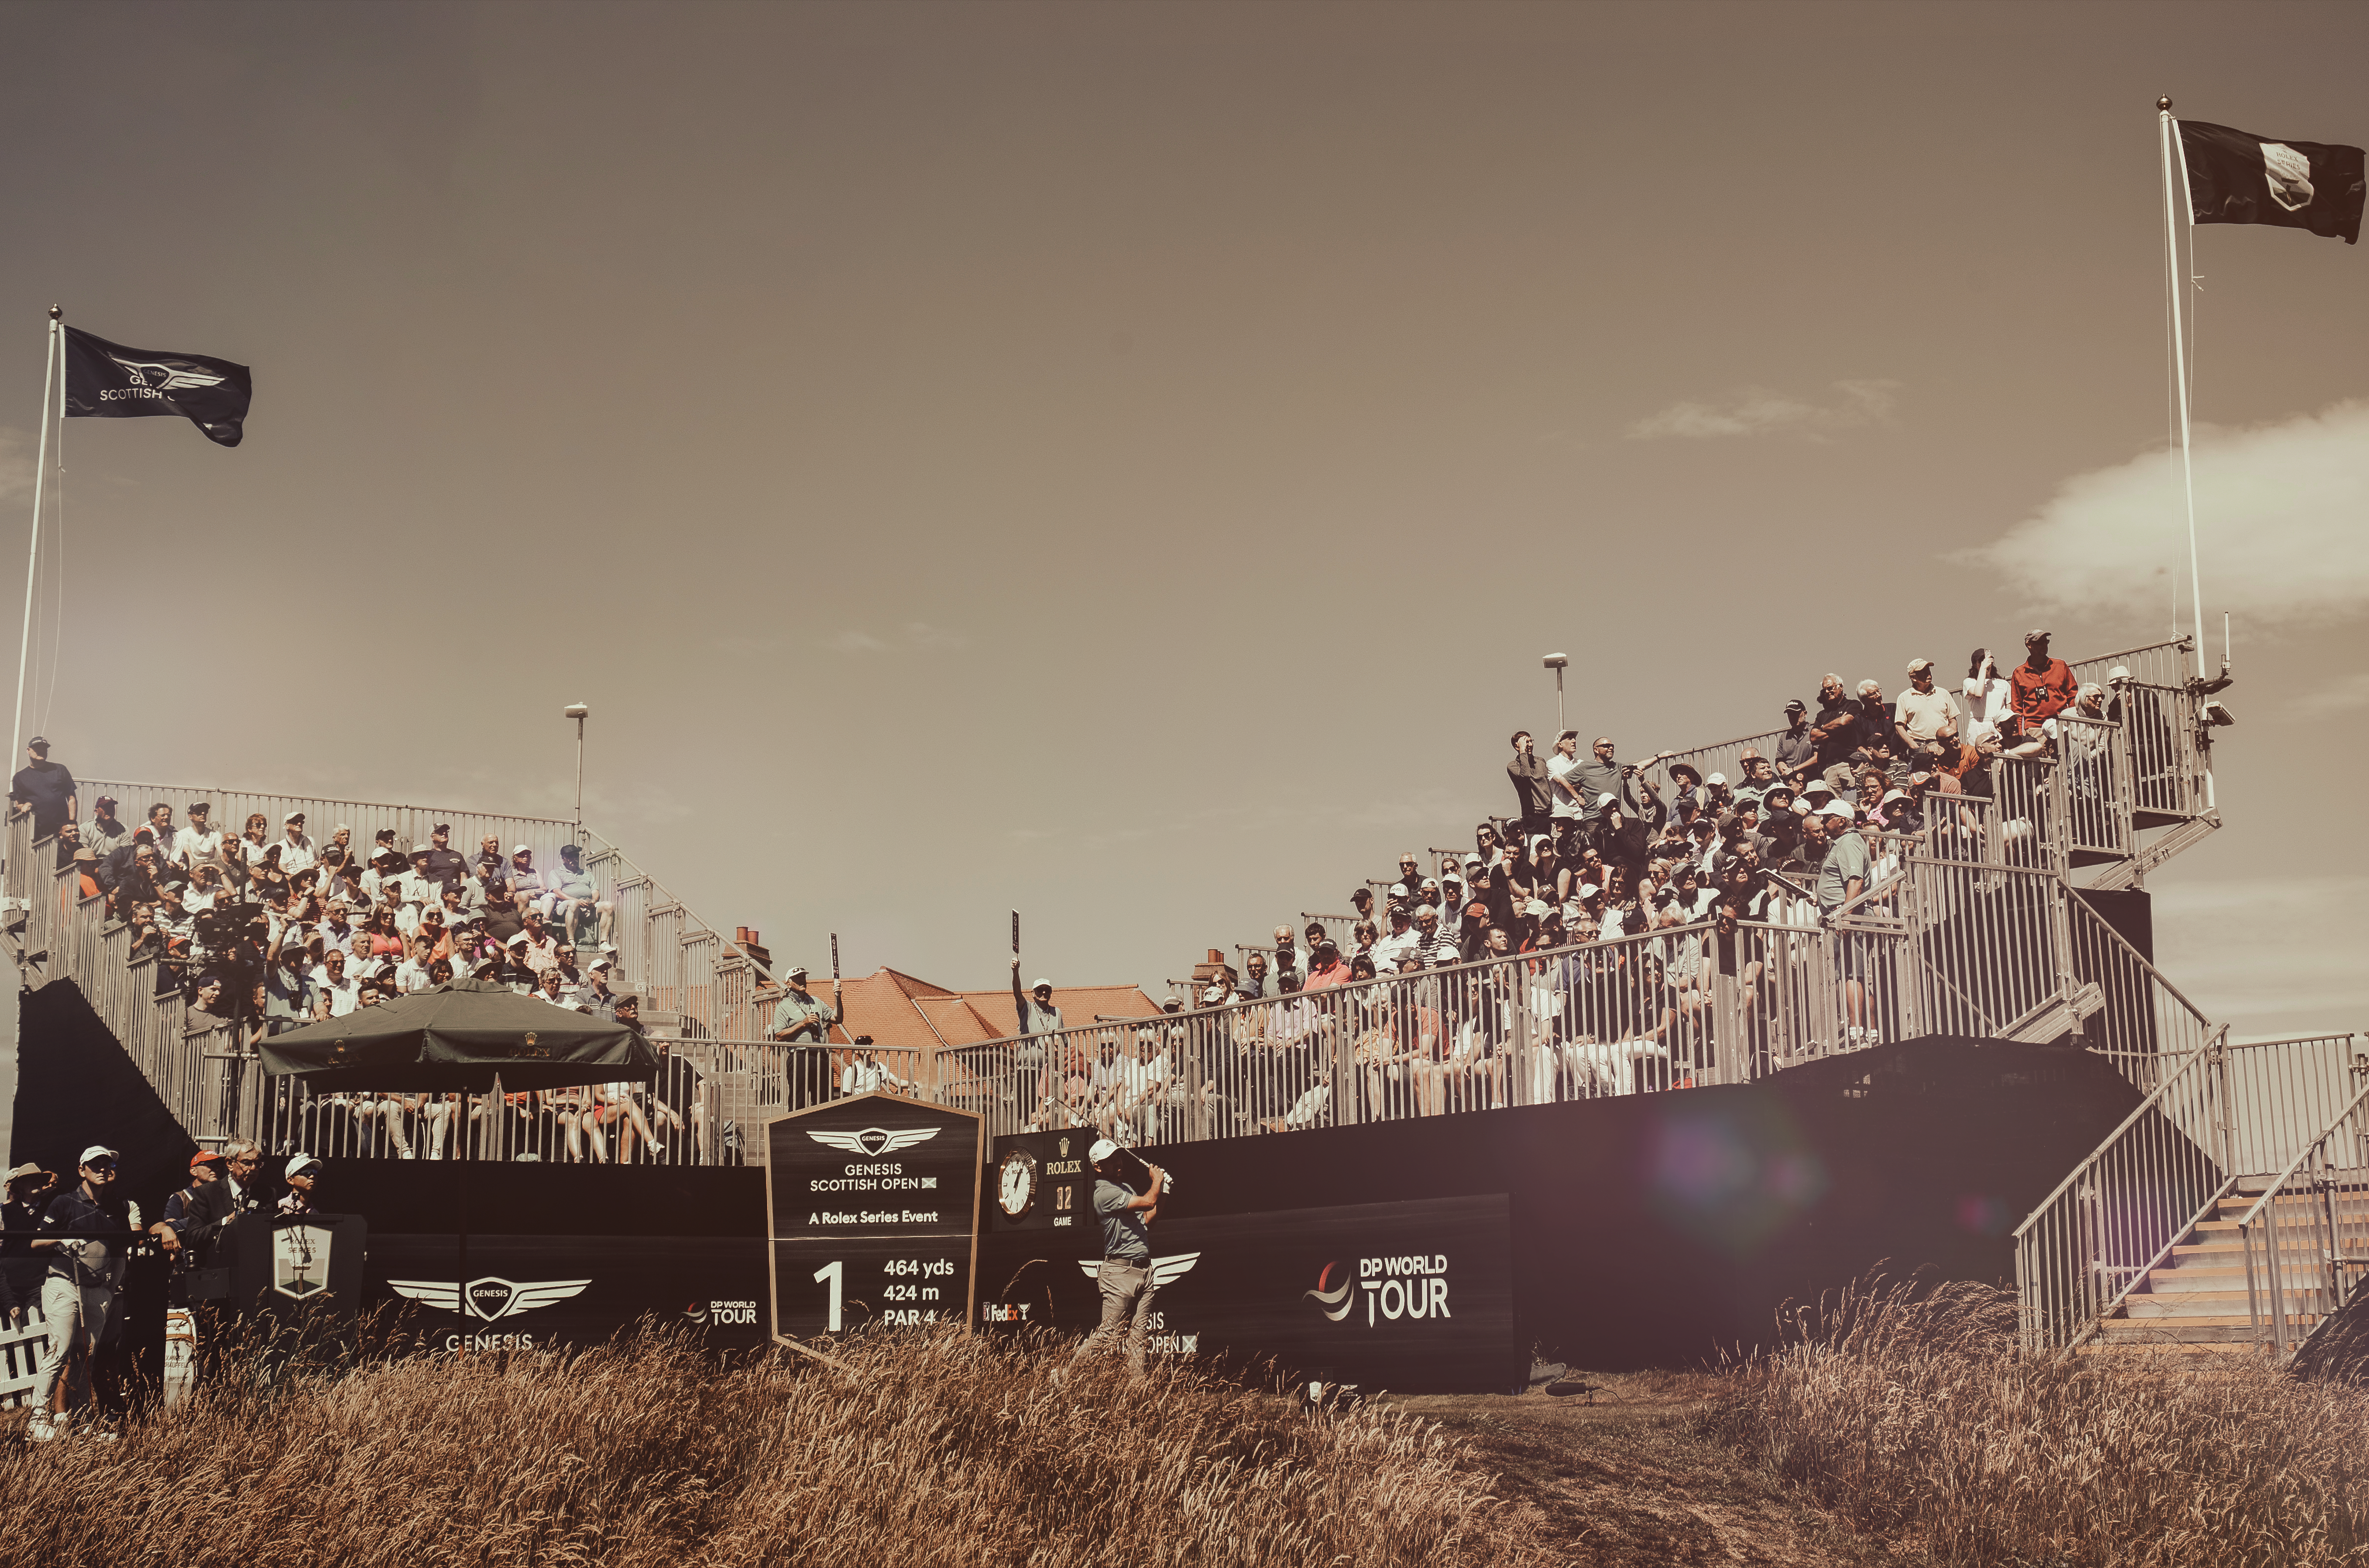 A player teeing off on the first hole at the Genesis Scottish Open